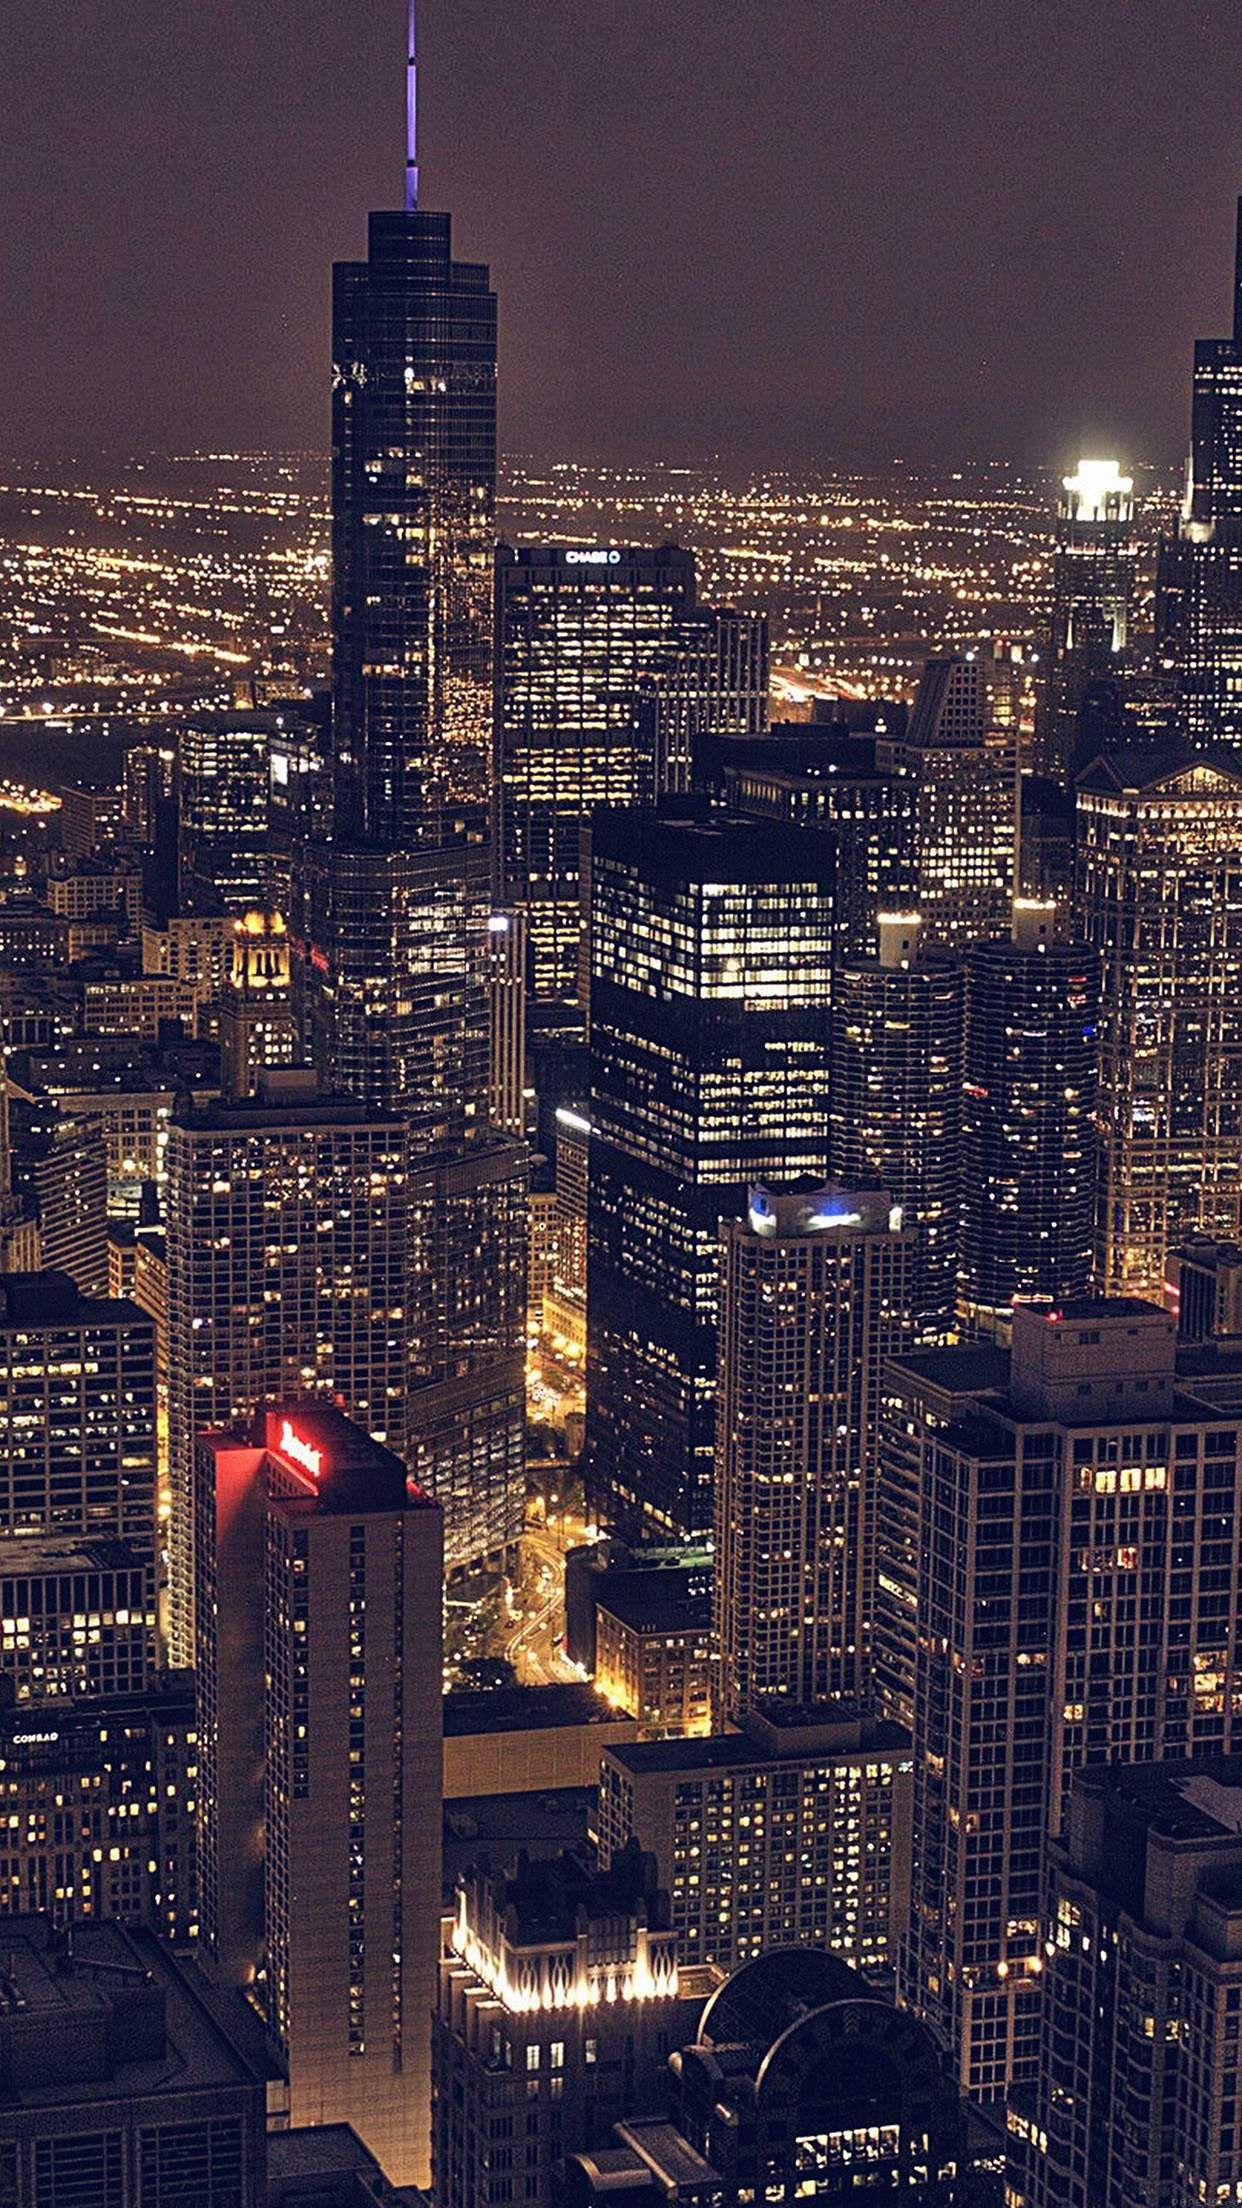 Download Mega Collection of Cool iPhone Wallpaper. City view night, City wallpaper, Chicago city